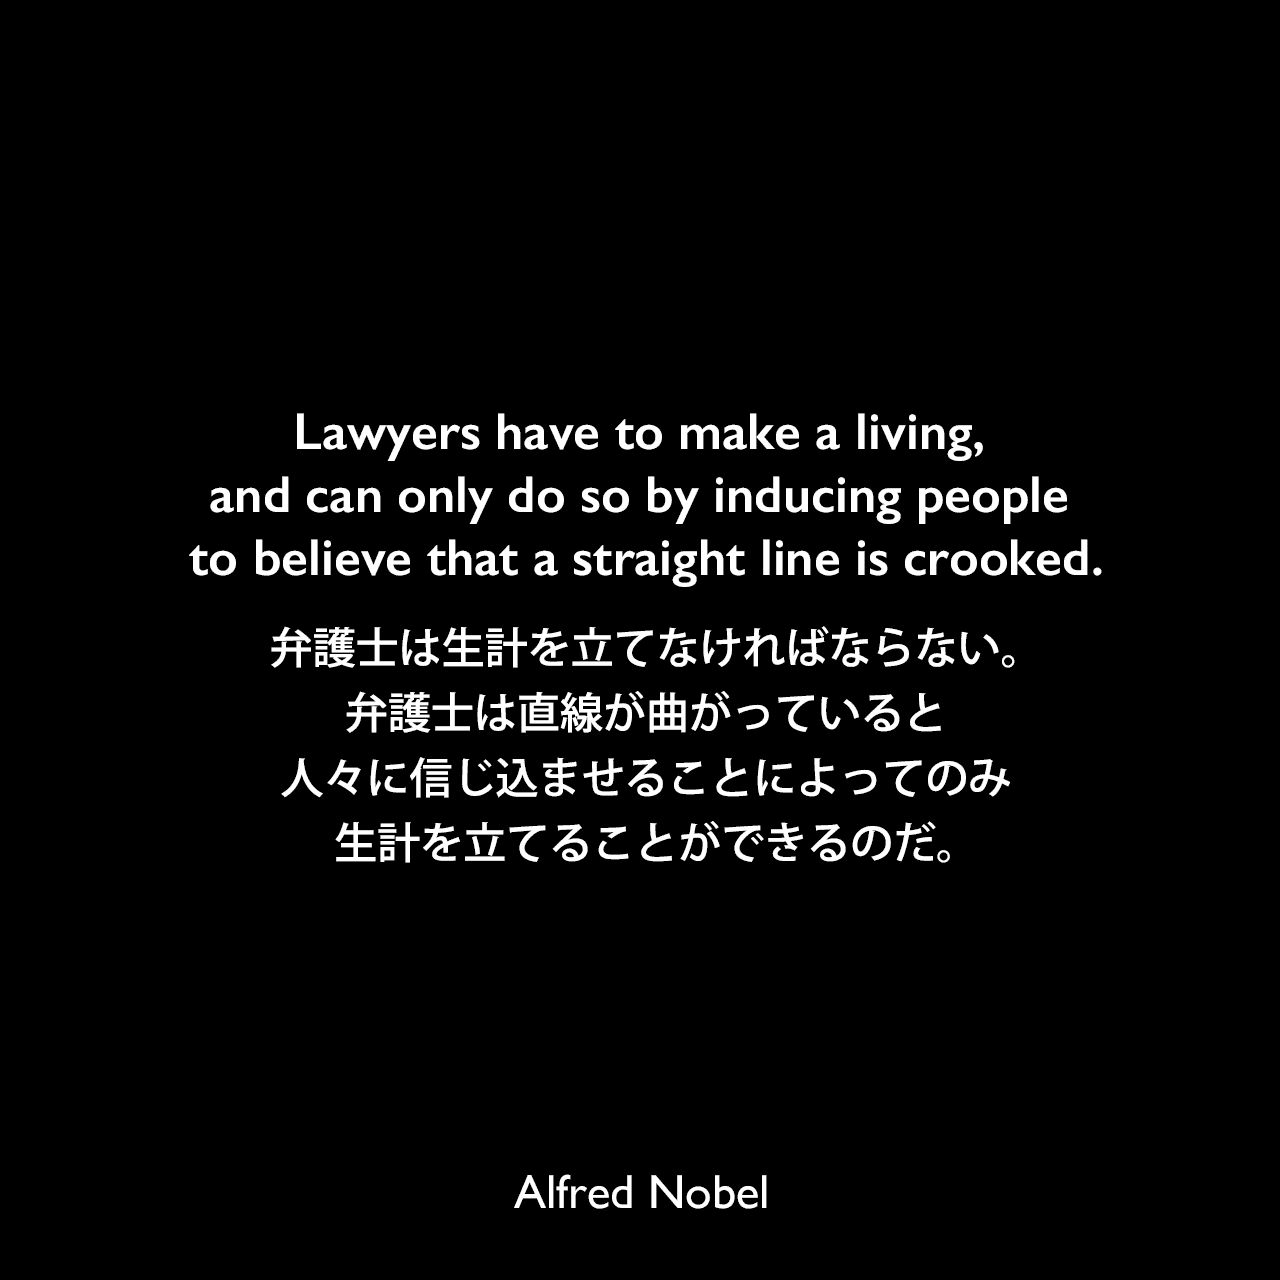 Lawyers have to make a living, and can only do so by inducing people to believe that a straight line is crooked.弁護士は生計を立てなければならない。弁護士は直線が曲がっていると人々に信じ込ませることによってのみ生計を立てることができるのだ。Alfred Nobel